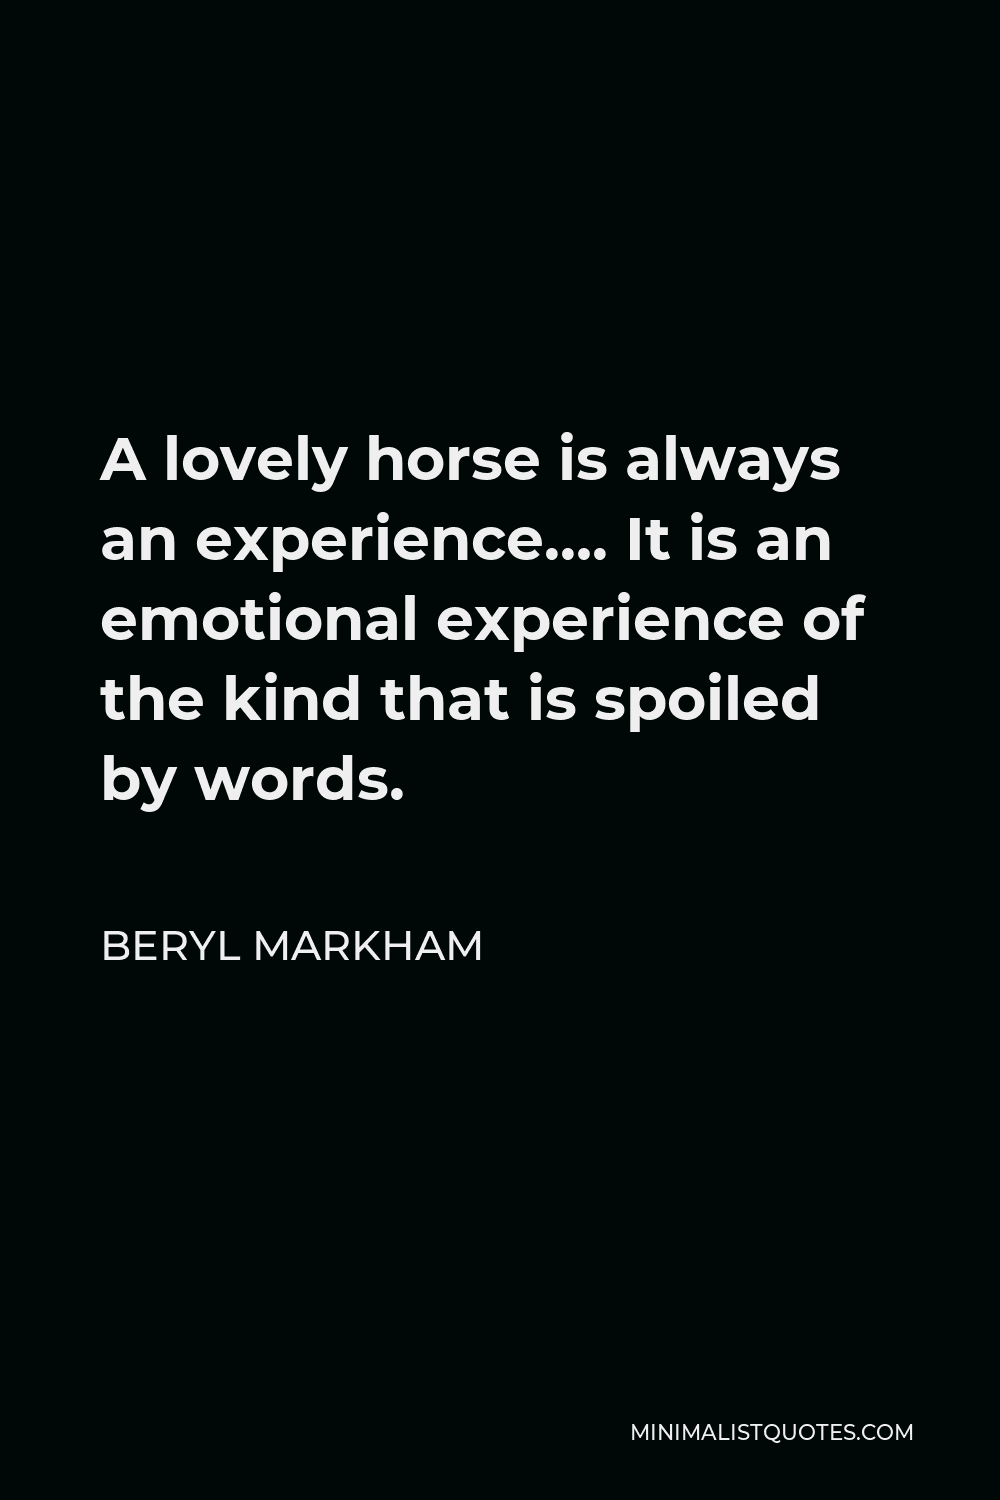 Beryl Markham Quote - A lovely horse is always an experience…. It is an emotional experience of the kind that is spoiled by words.